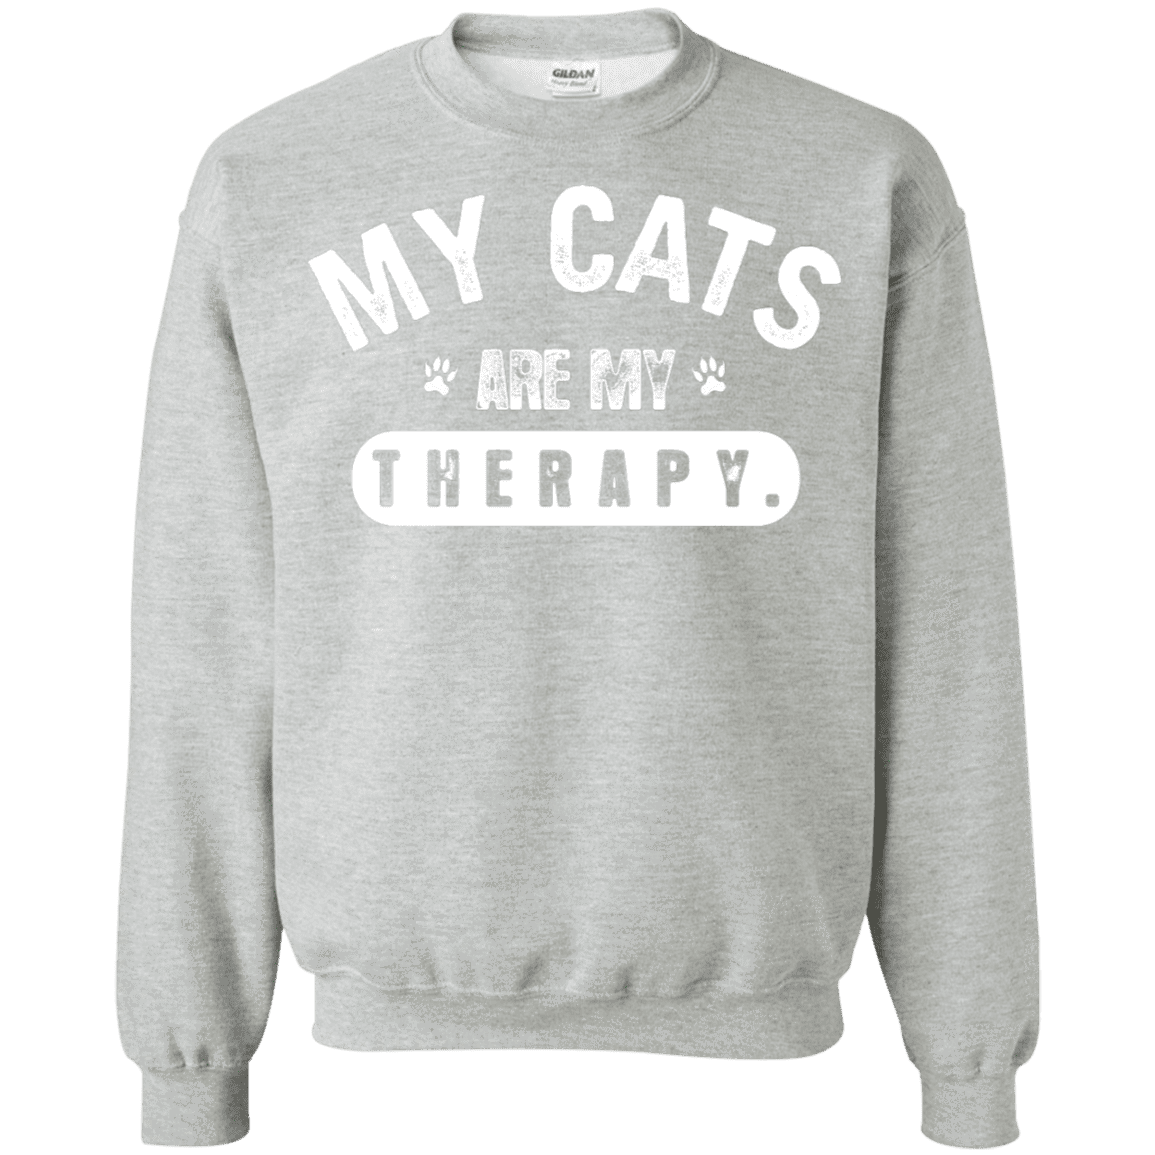 My Cats Are My Therapy - Sweatshirt.